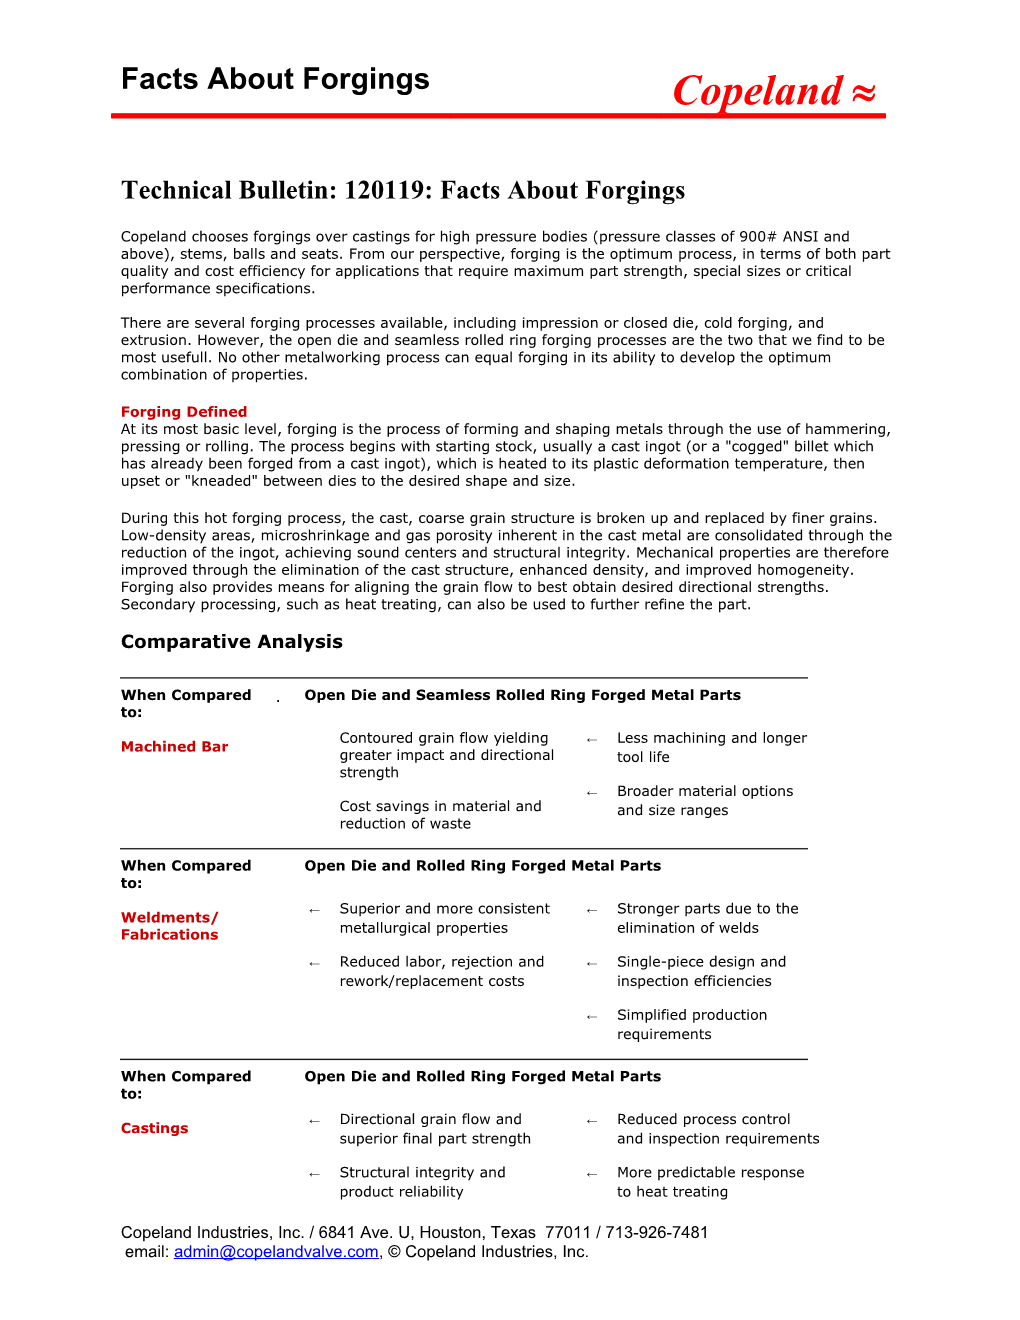 Technical Bulletin: 120119: Facts About Forgings